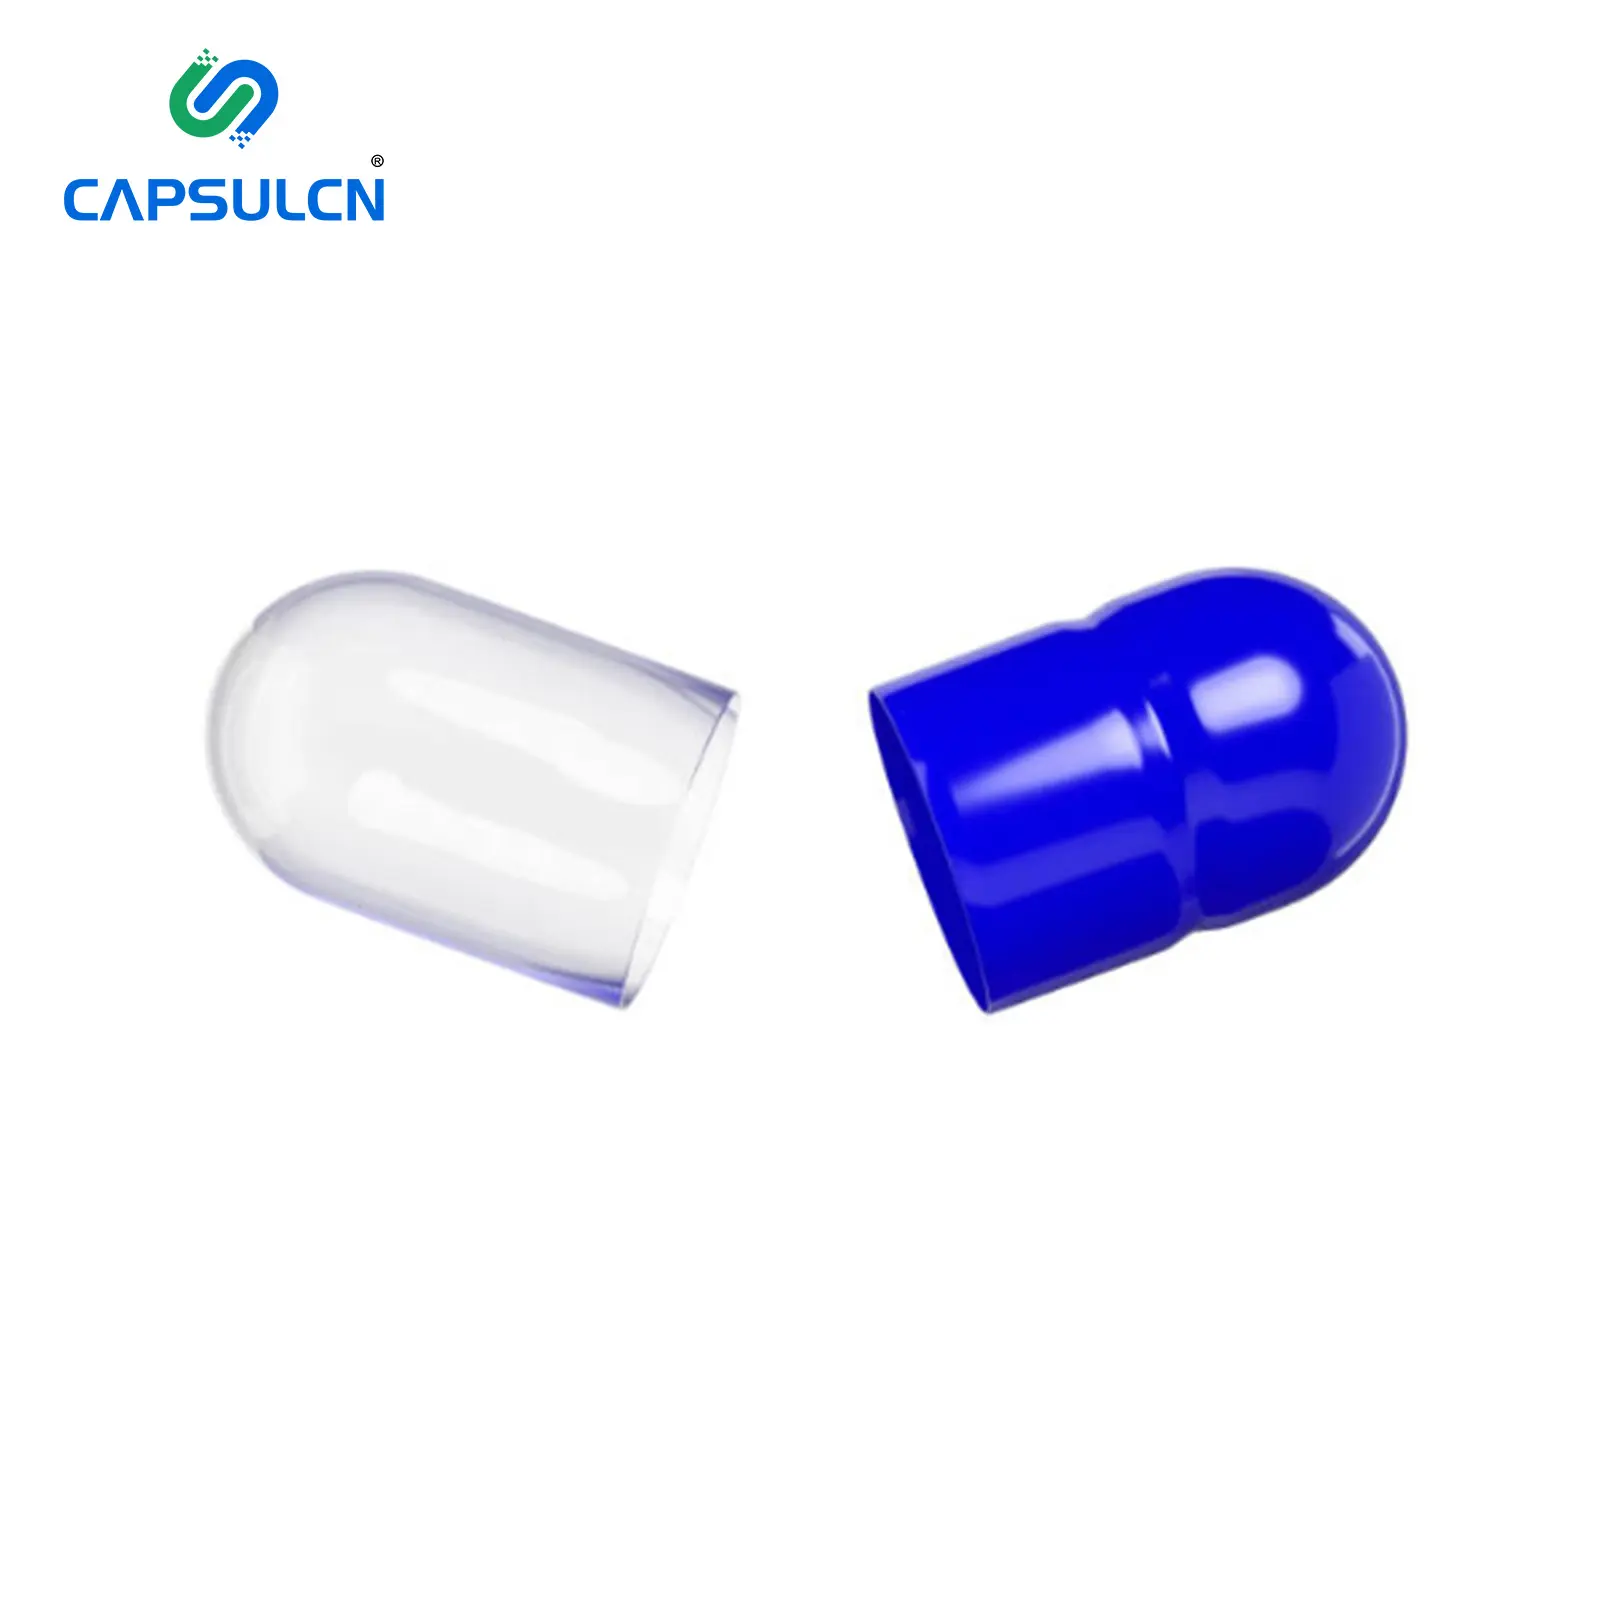 CapsulCN Size 00 0 Separated Capsule Mix of Blue and Transparent Vegetable Capsule Pill Capsule Empty Vegetable